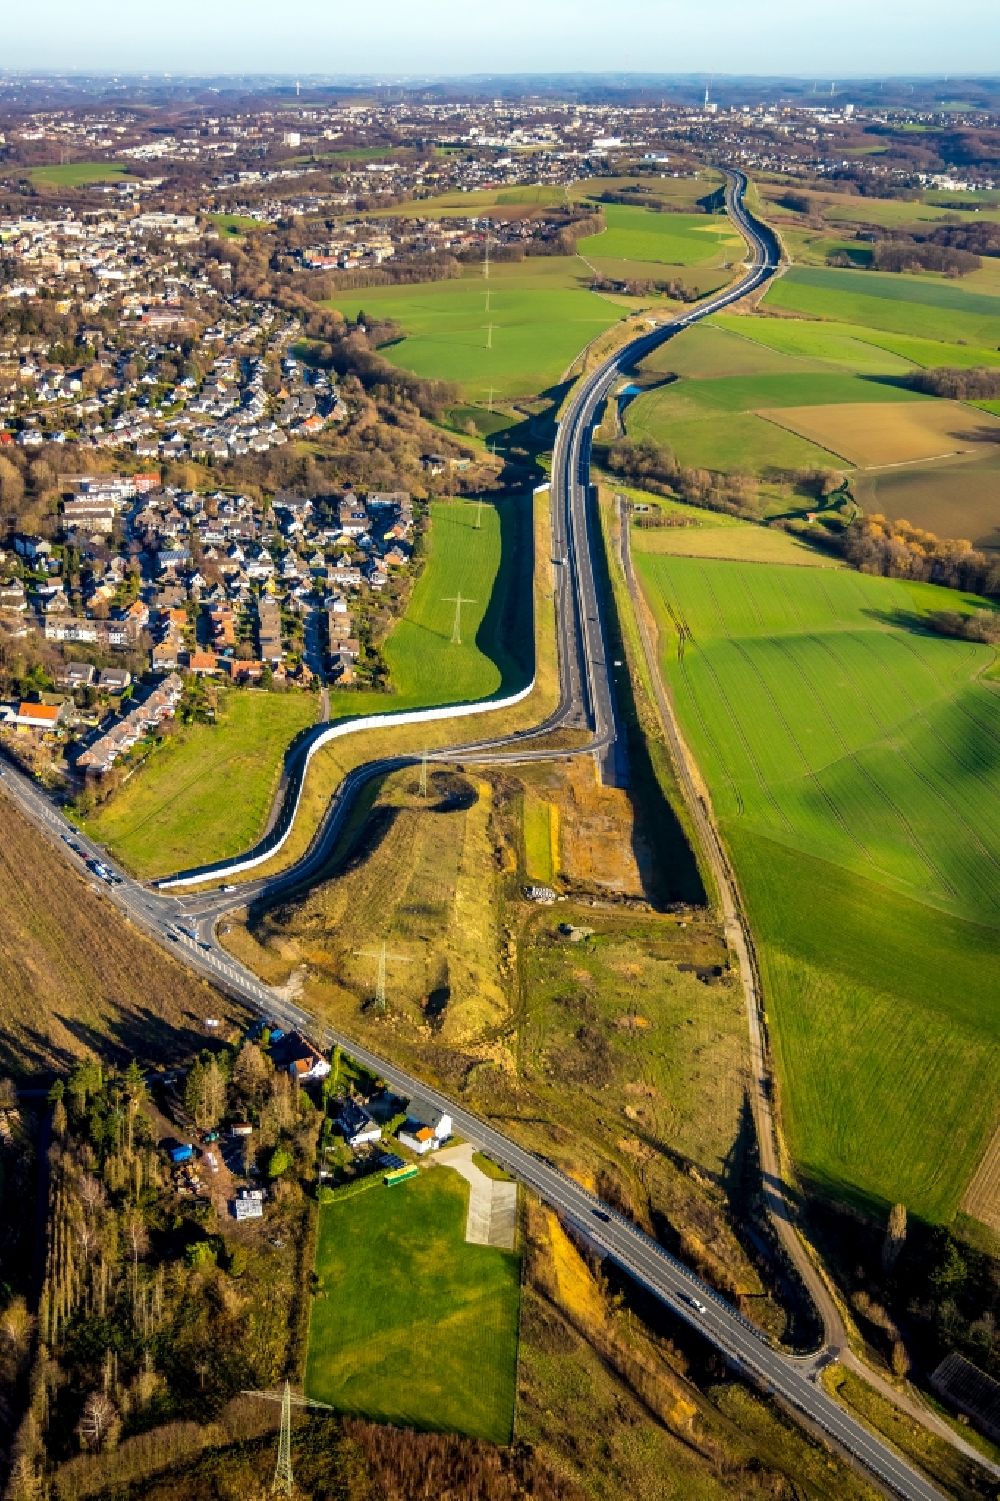 Heiligenhaus from above - Highway route BAB 44 in in Heiligenhaus in the state North Rhine-Westphalia, Germany